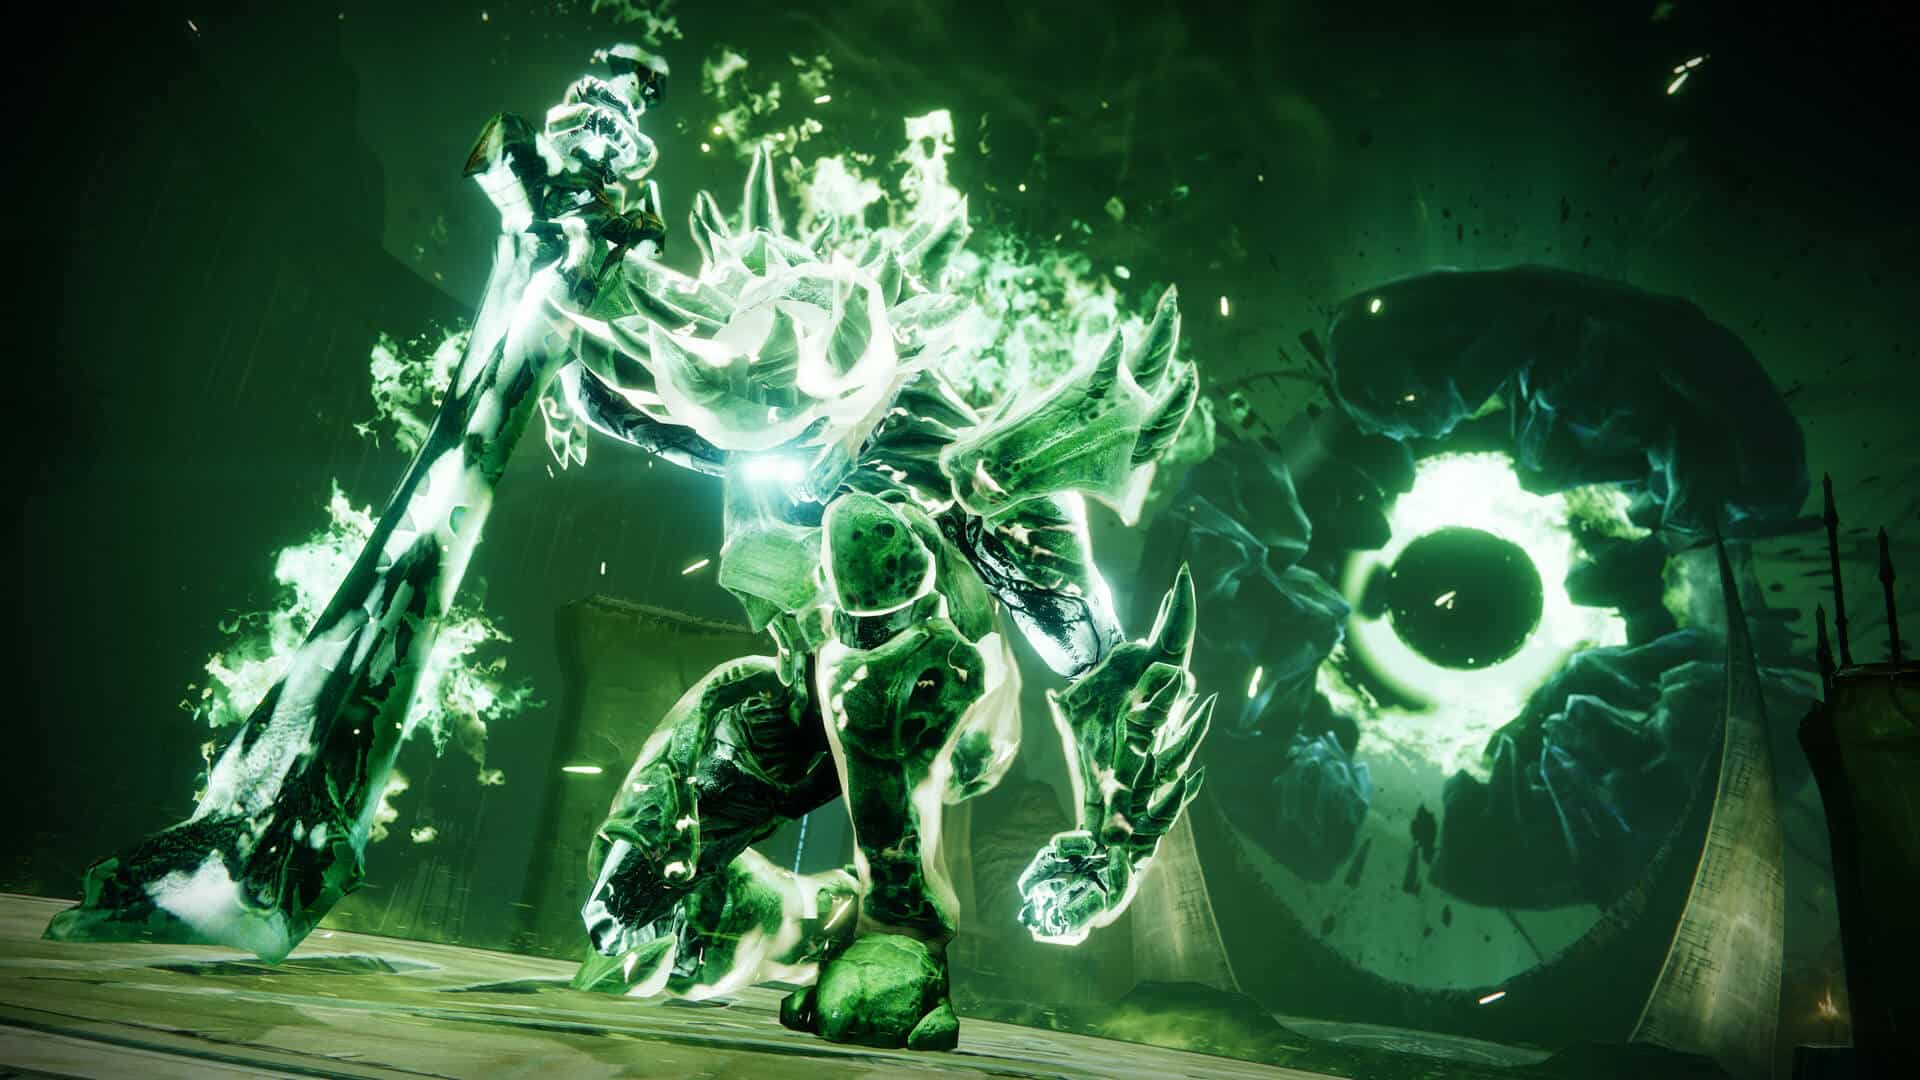 secure-victory-in-crota-s-end-how-to-beat-the-son-of-oryx-in-destiny-2